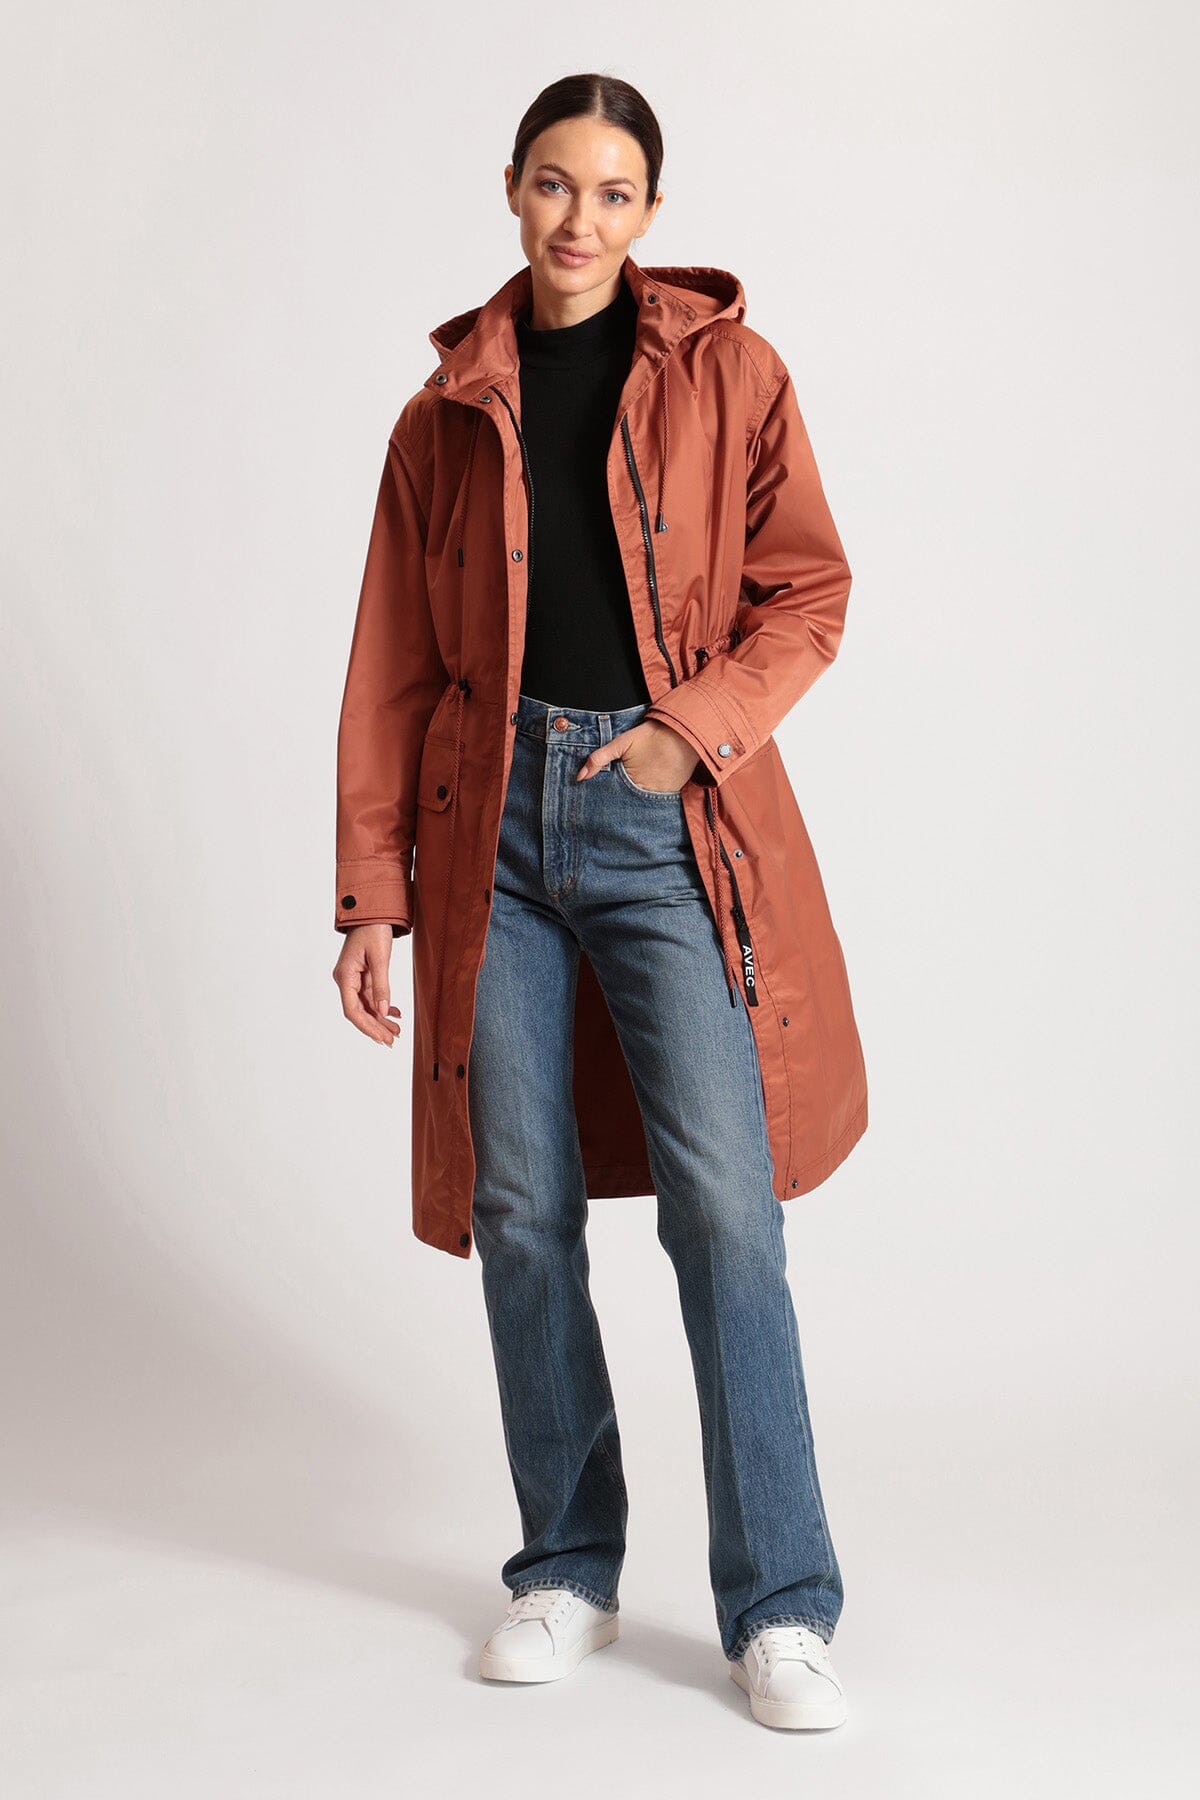 Rust orange relaxed water resistant rain anorak coat jacket - figure flattering day to night raincoats outerwear for women